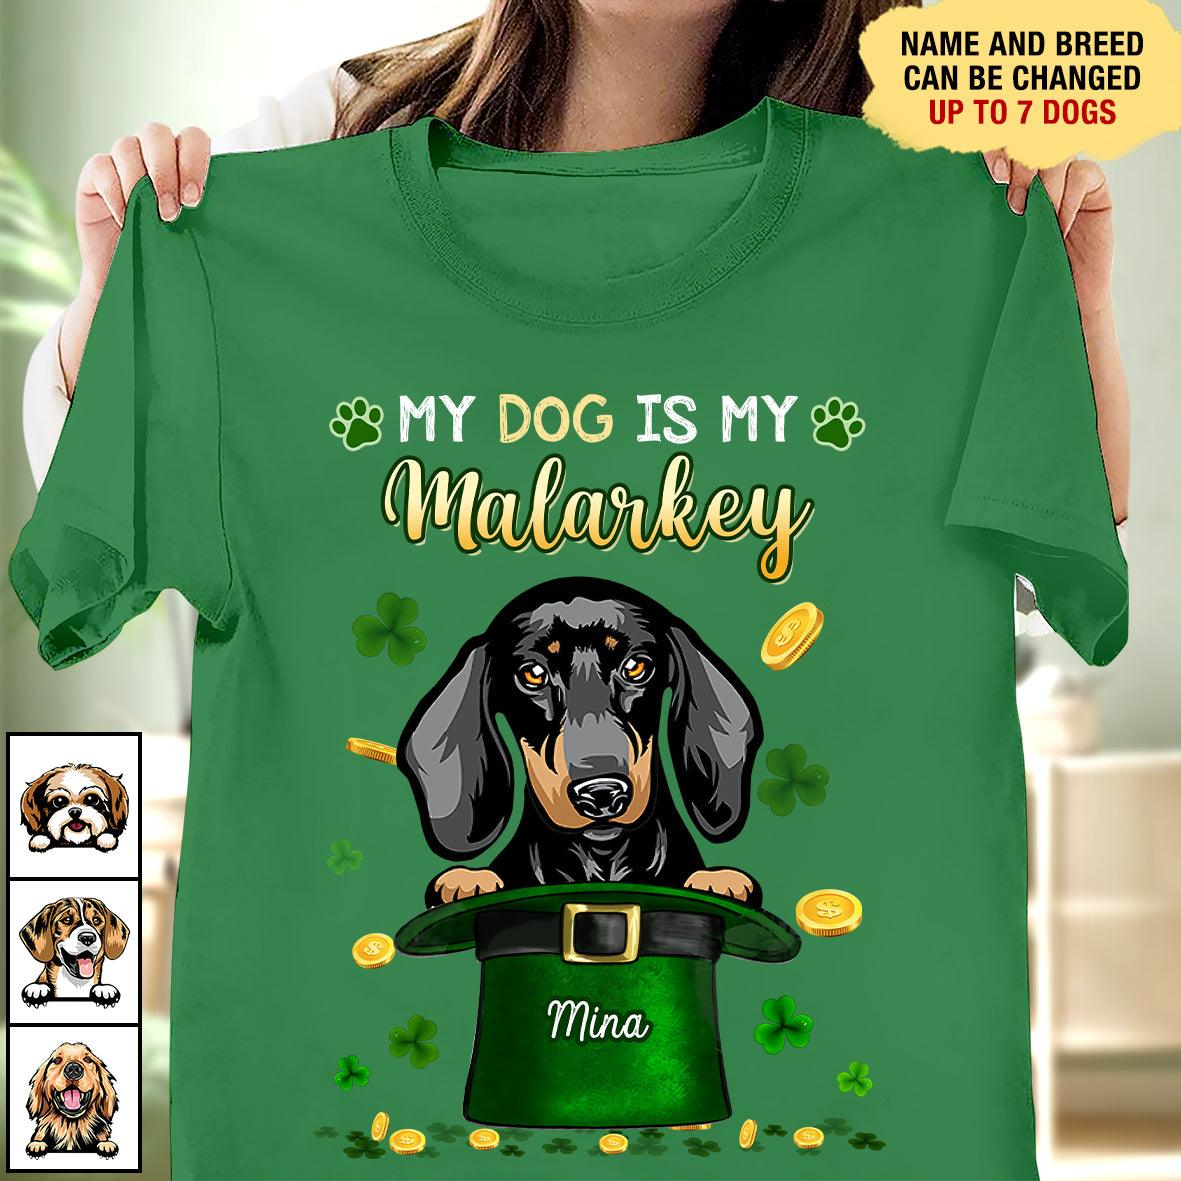 Mother Day Personalized Dog Breeds T-shirt, Gifts For Dog Moms, To The